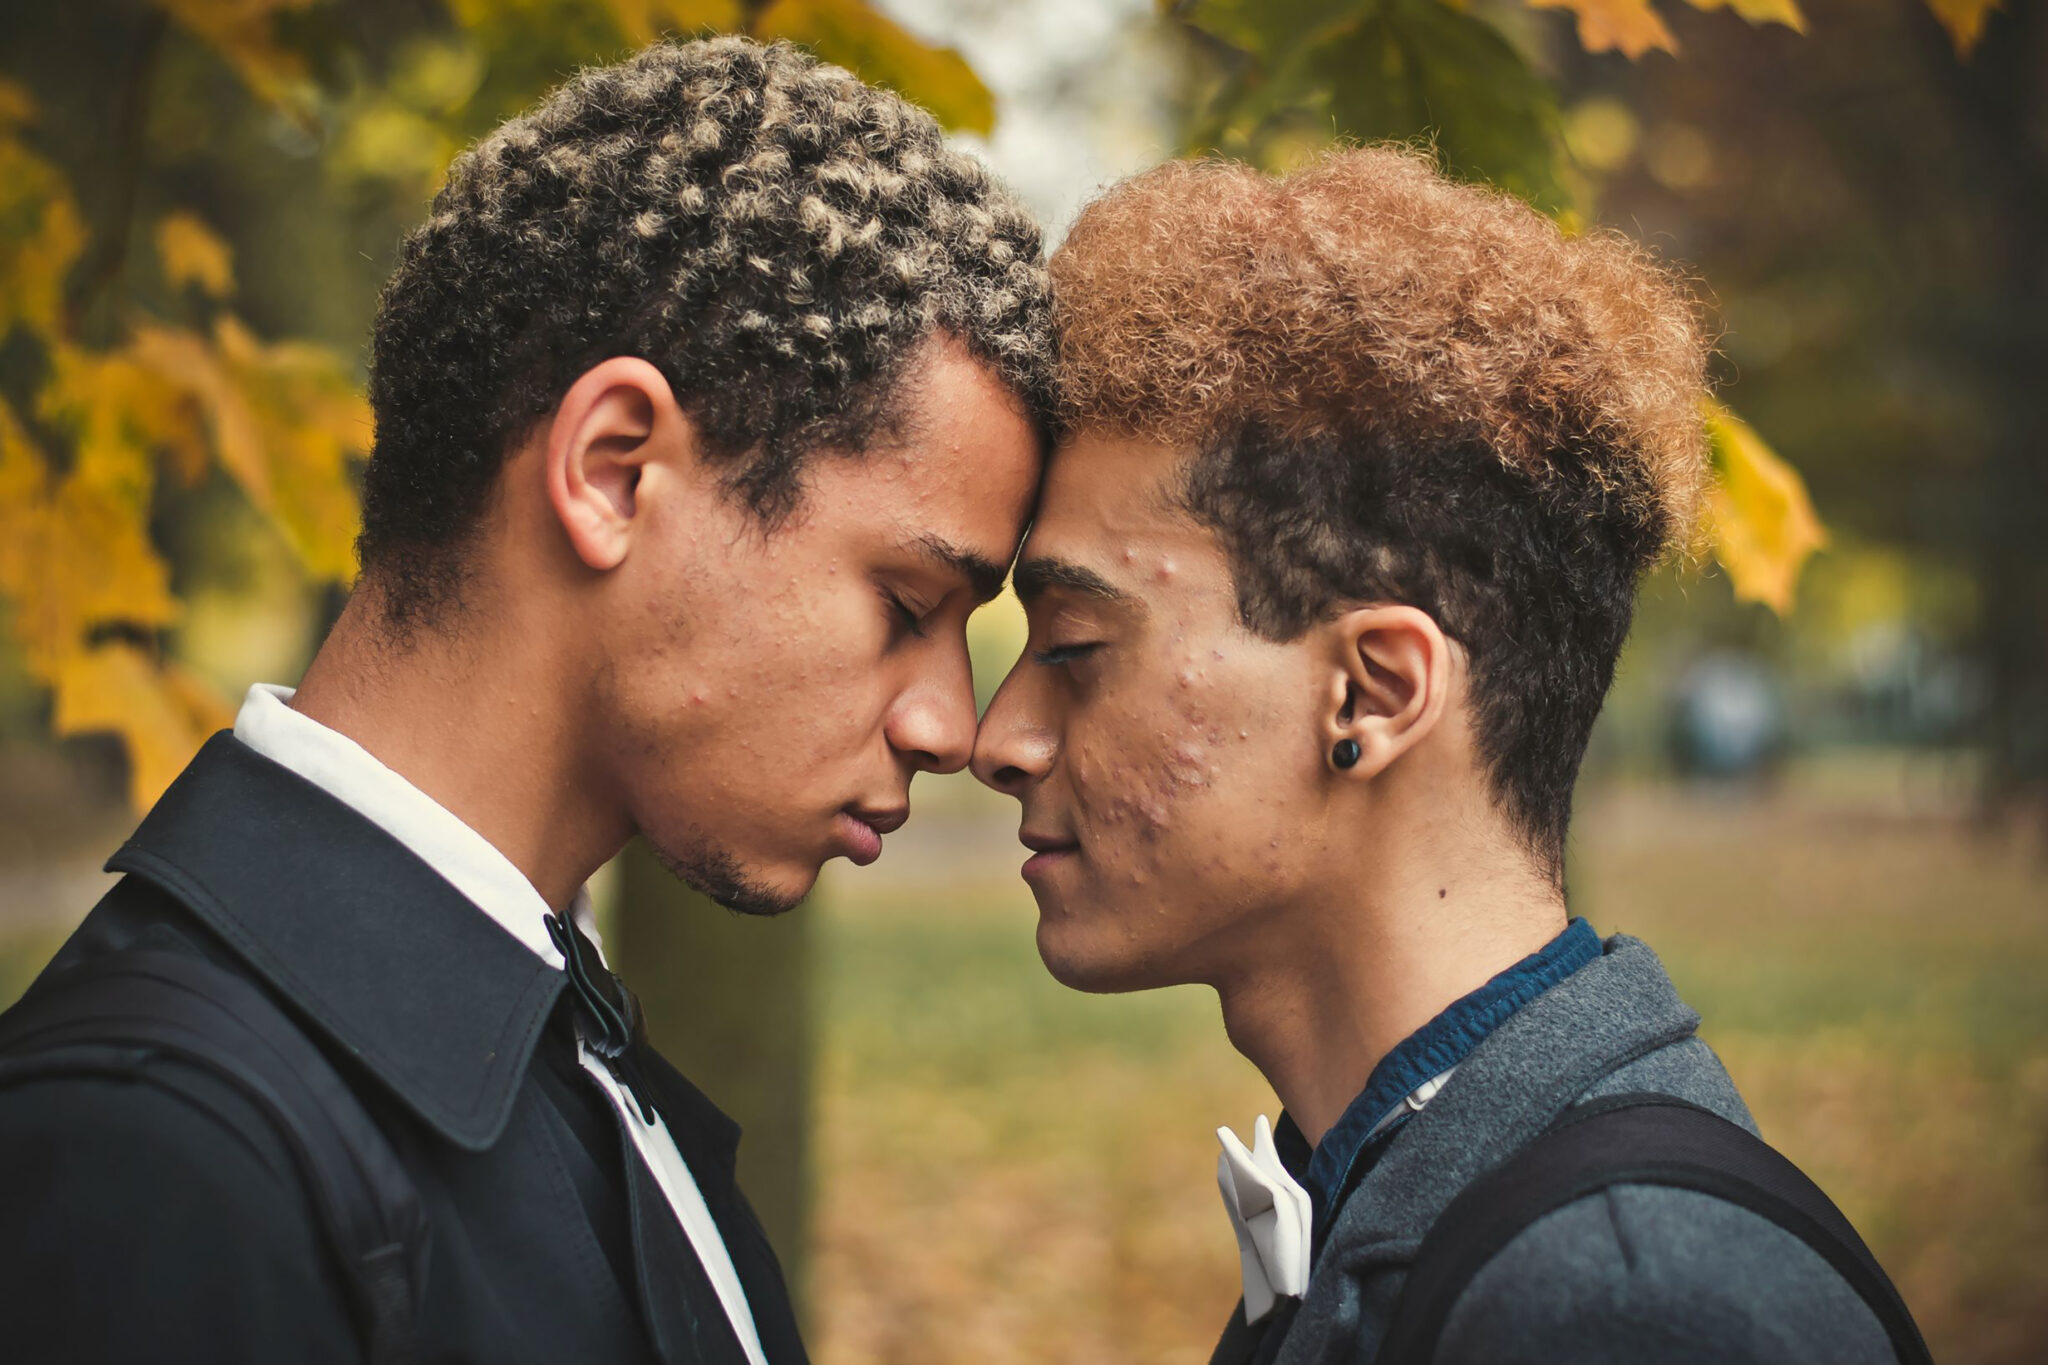 Handsome young gay couple standing head to head in park. Concept of same sex love, equality and LGBT rights